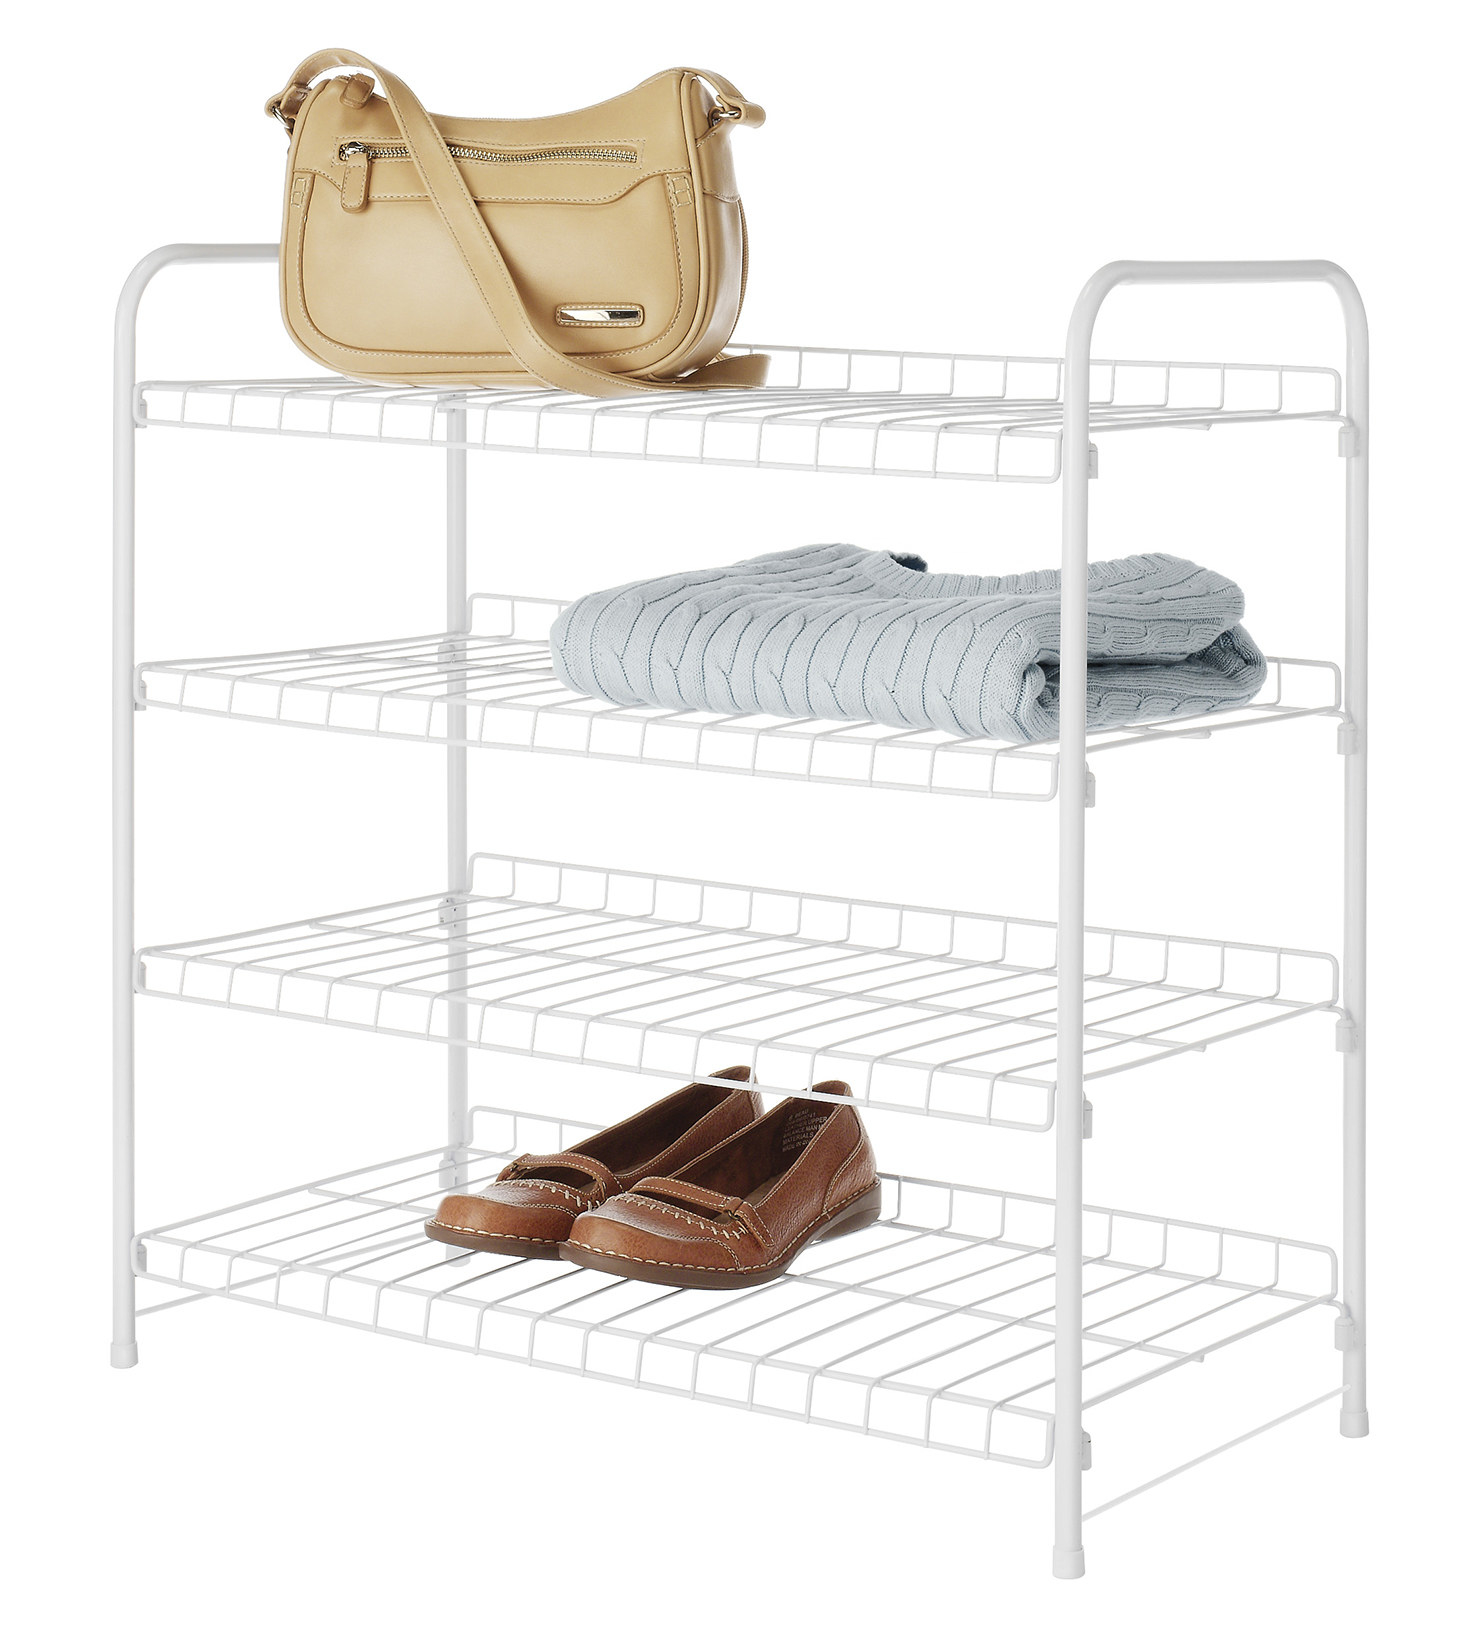 The white wire shelf with four shelves